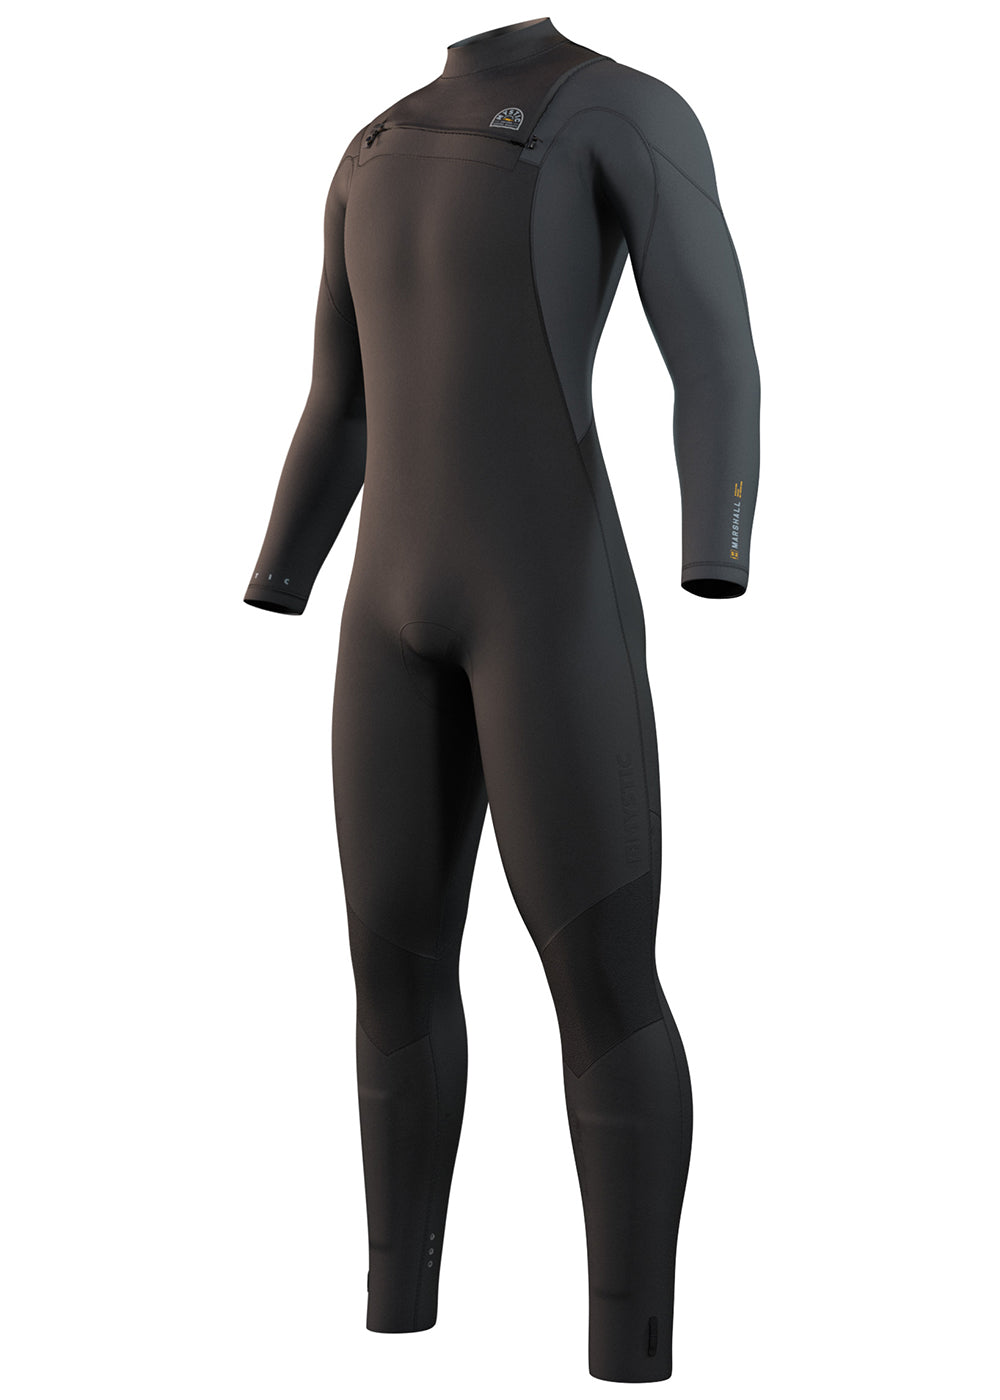 Mystic Marshall 3/2mm Front Zip Steamer Wetsuit